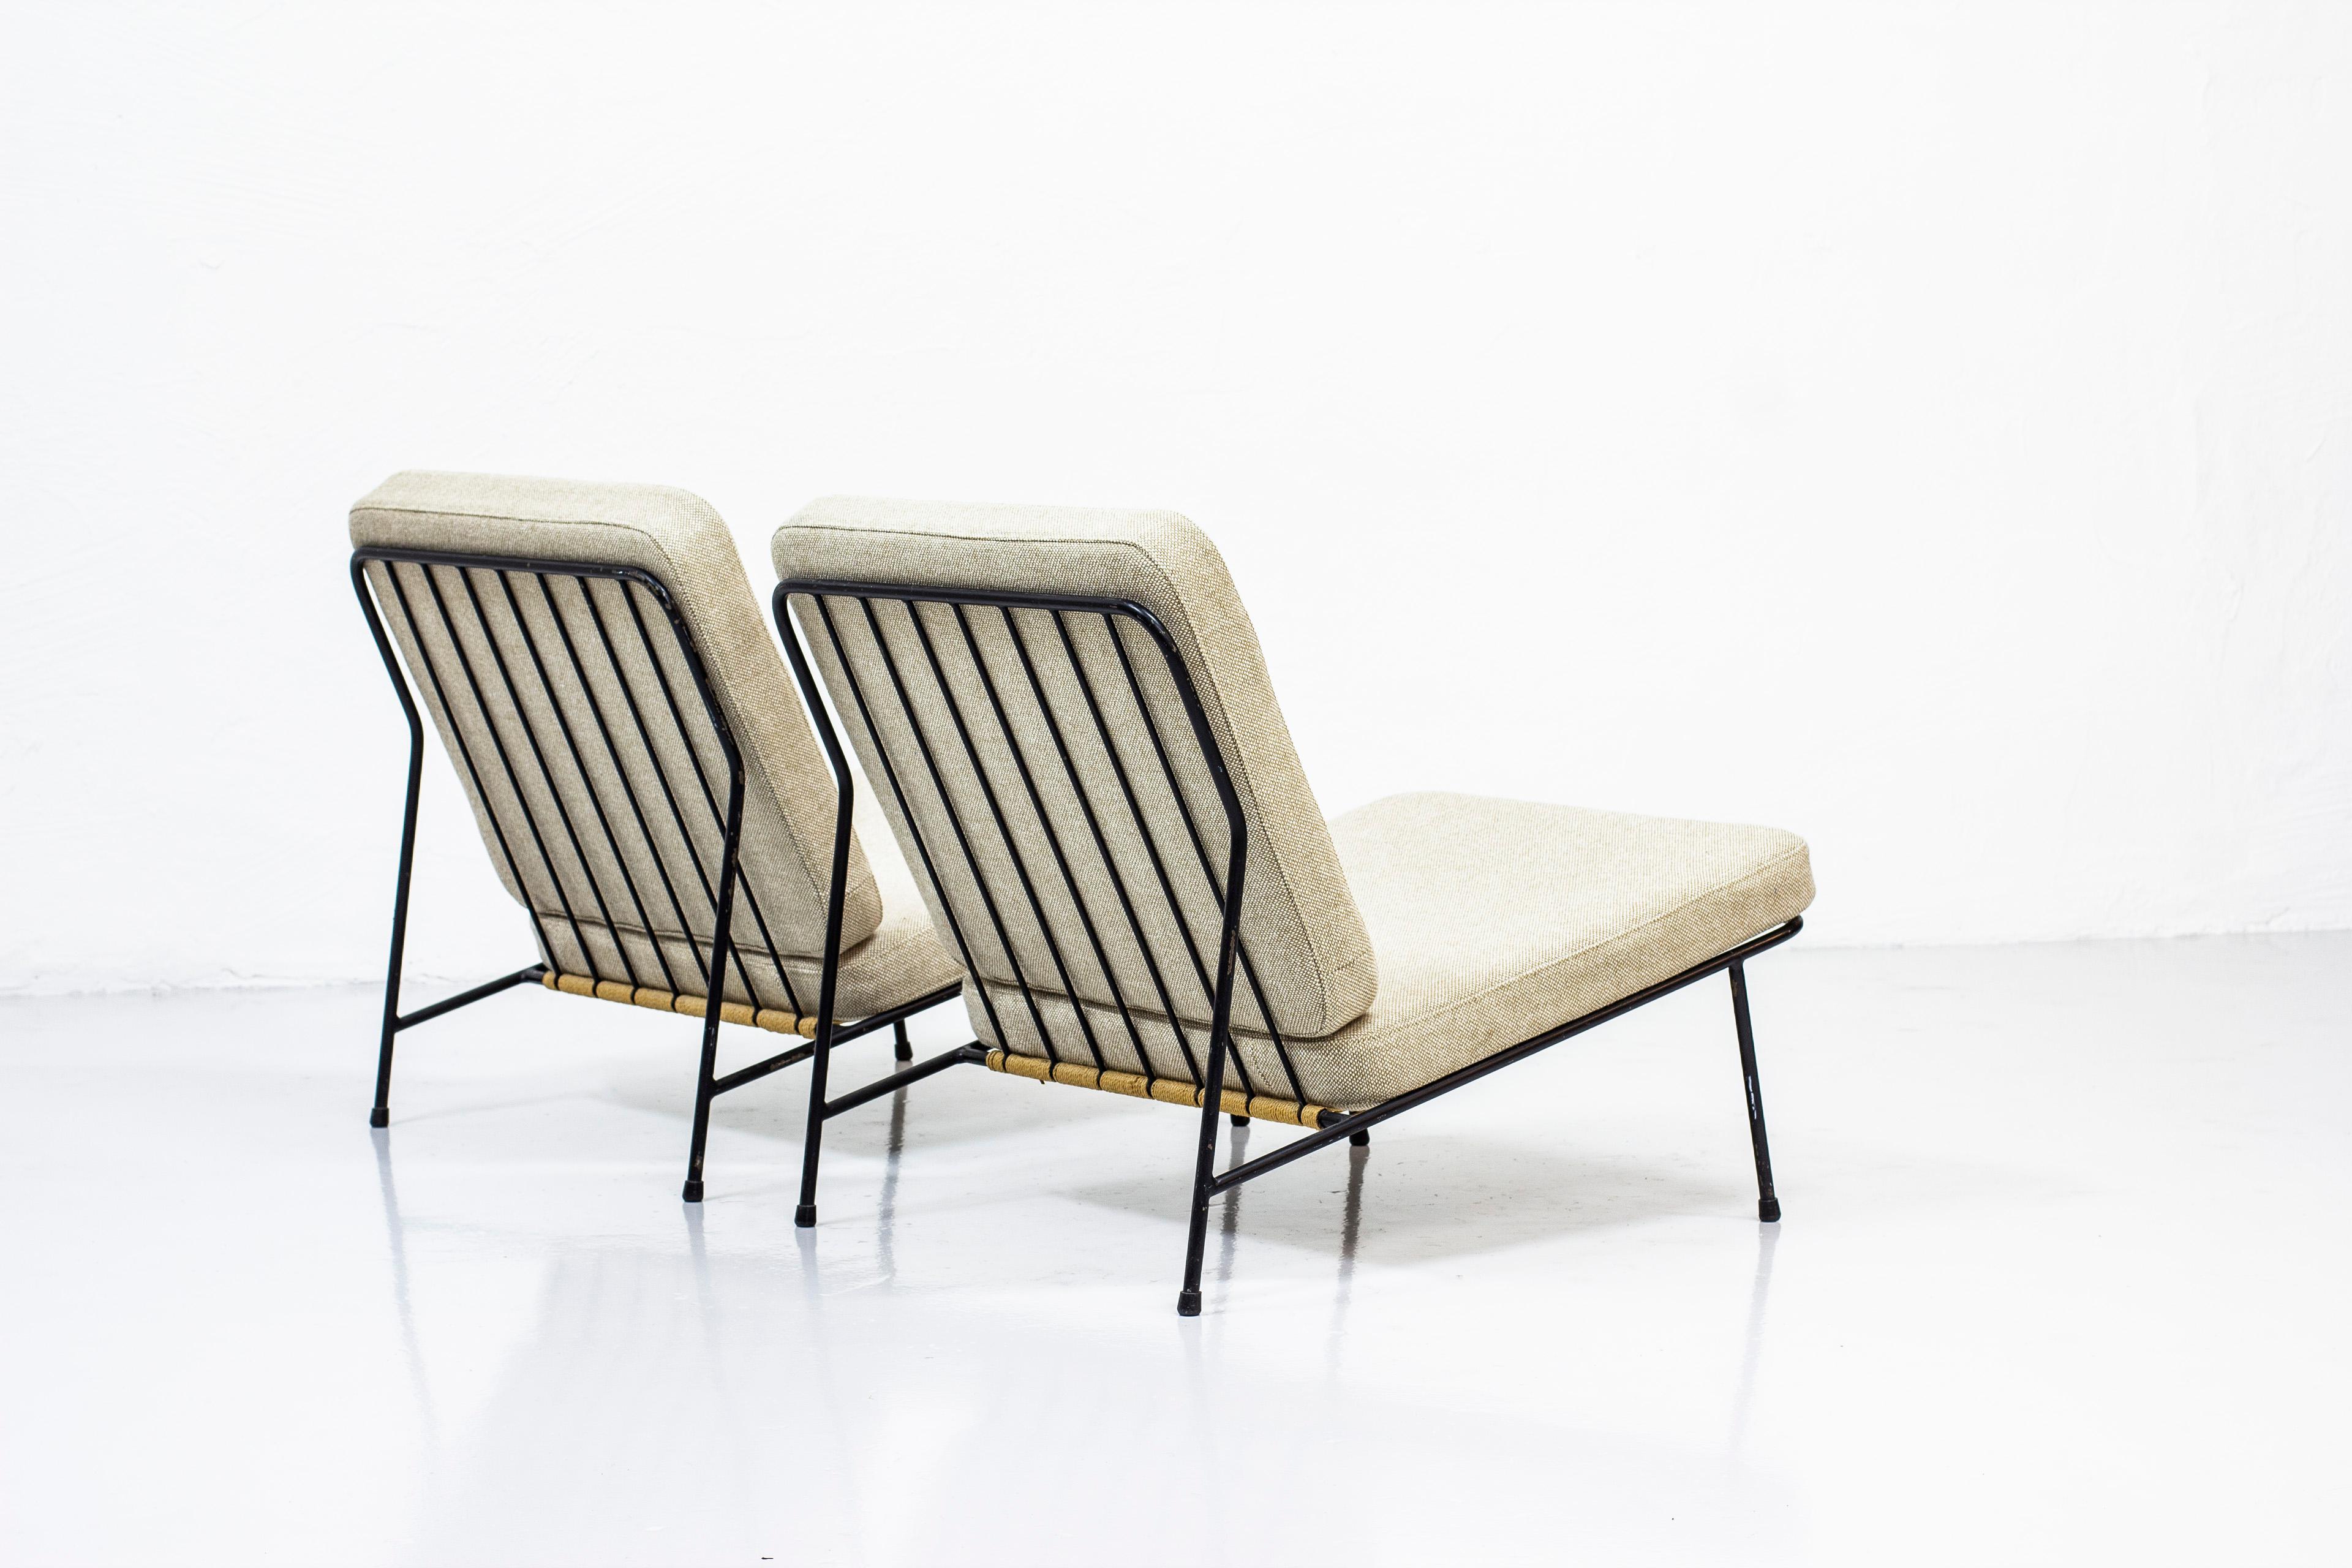 Swedish Lounge Chairs by Alf Svensson for Ljungs Industrier, Sweden, Midcentury, 1950s For Sale